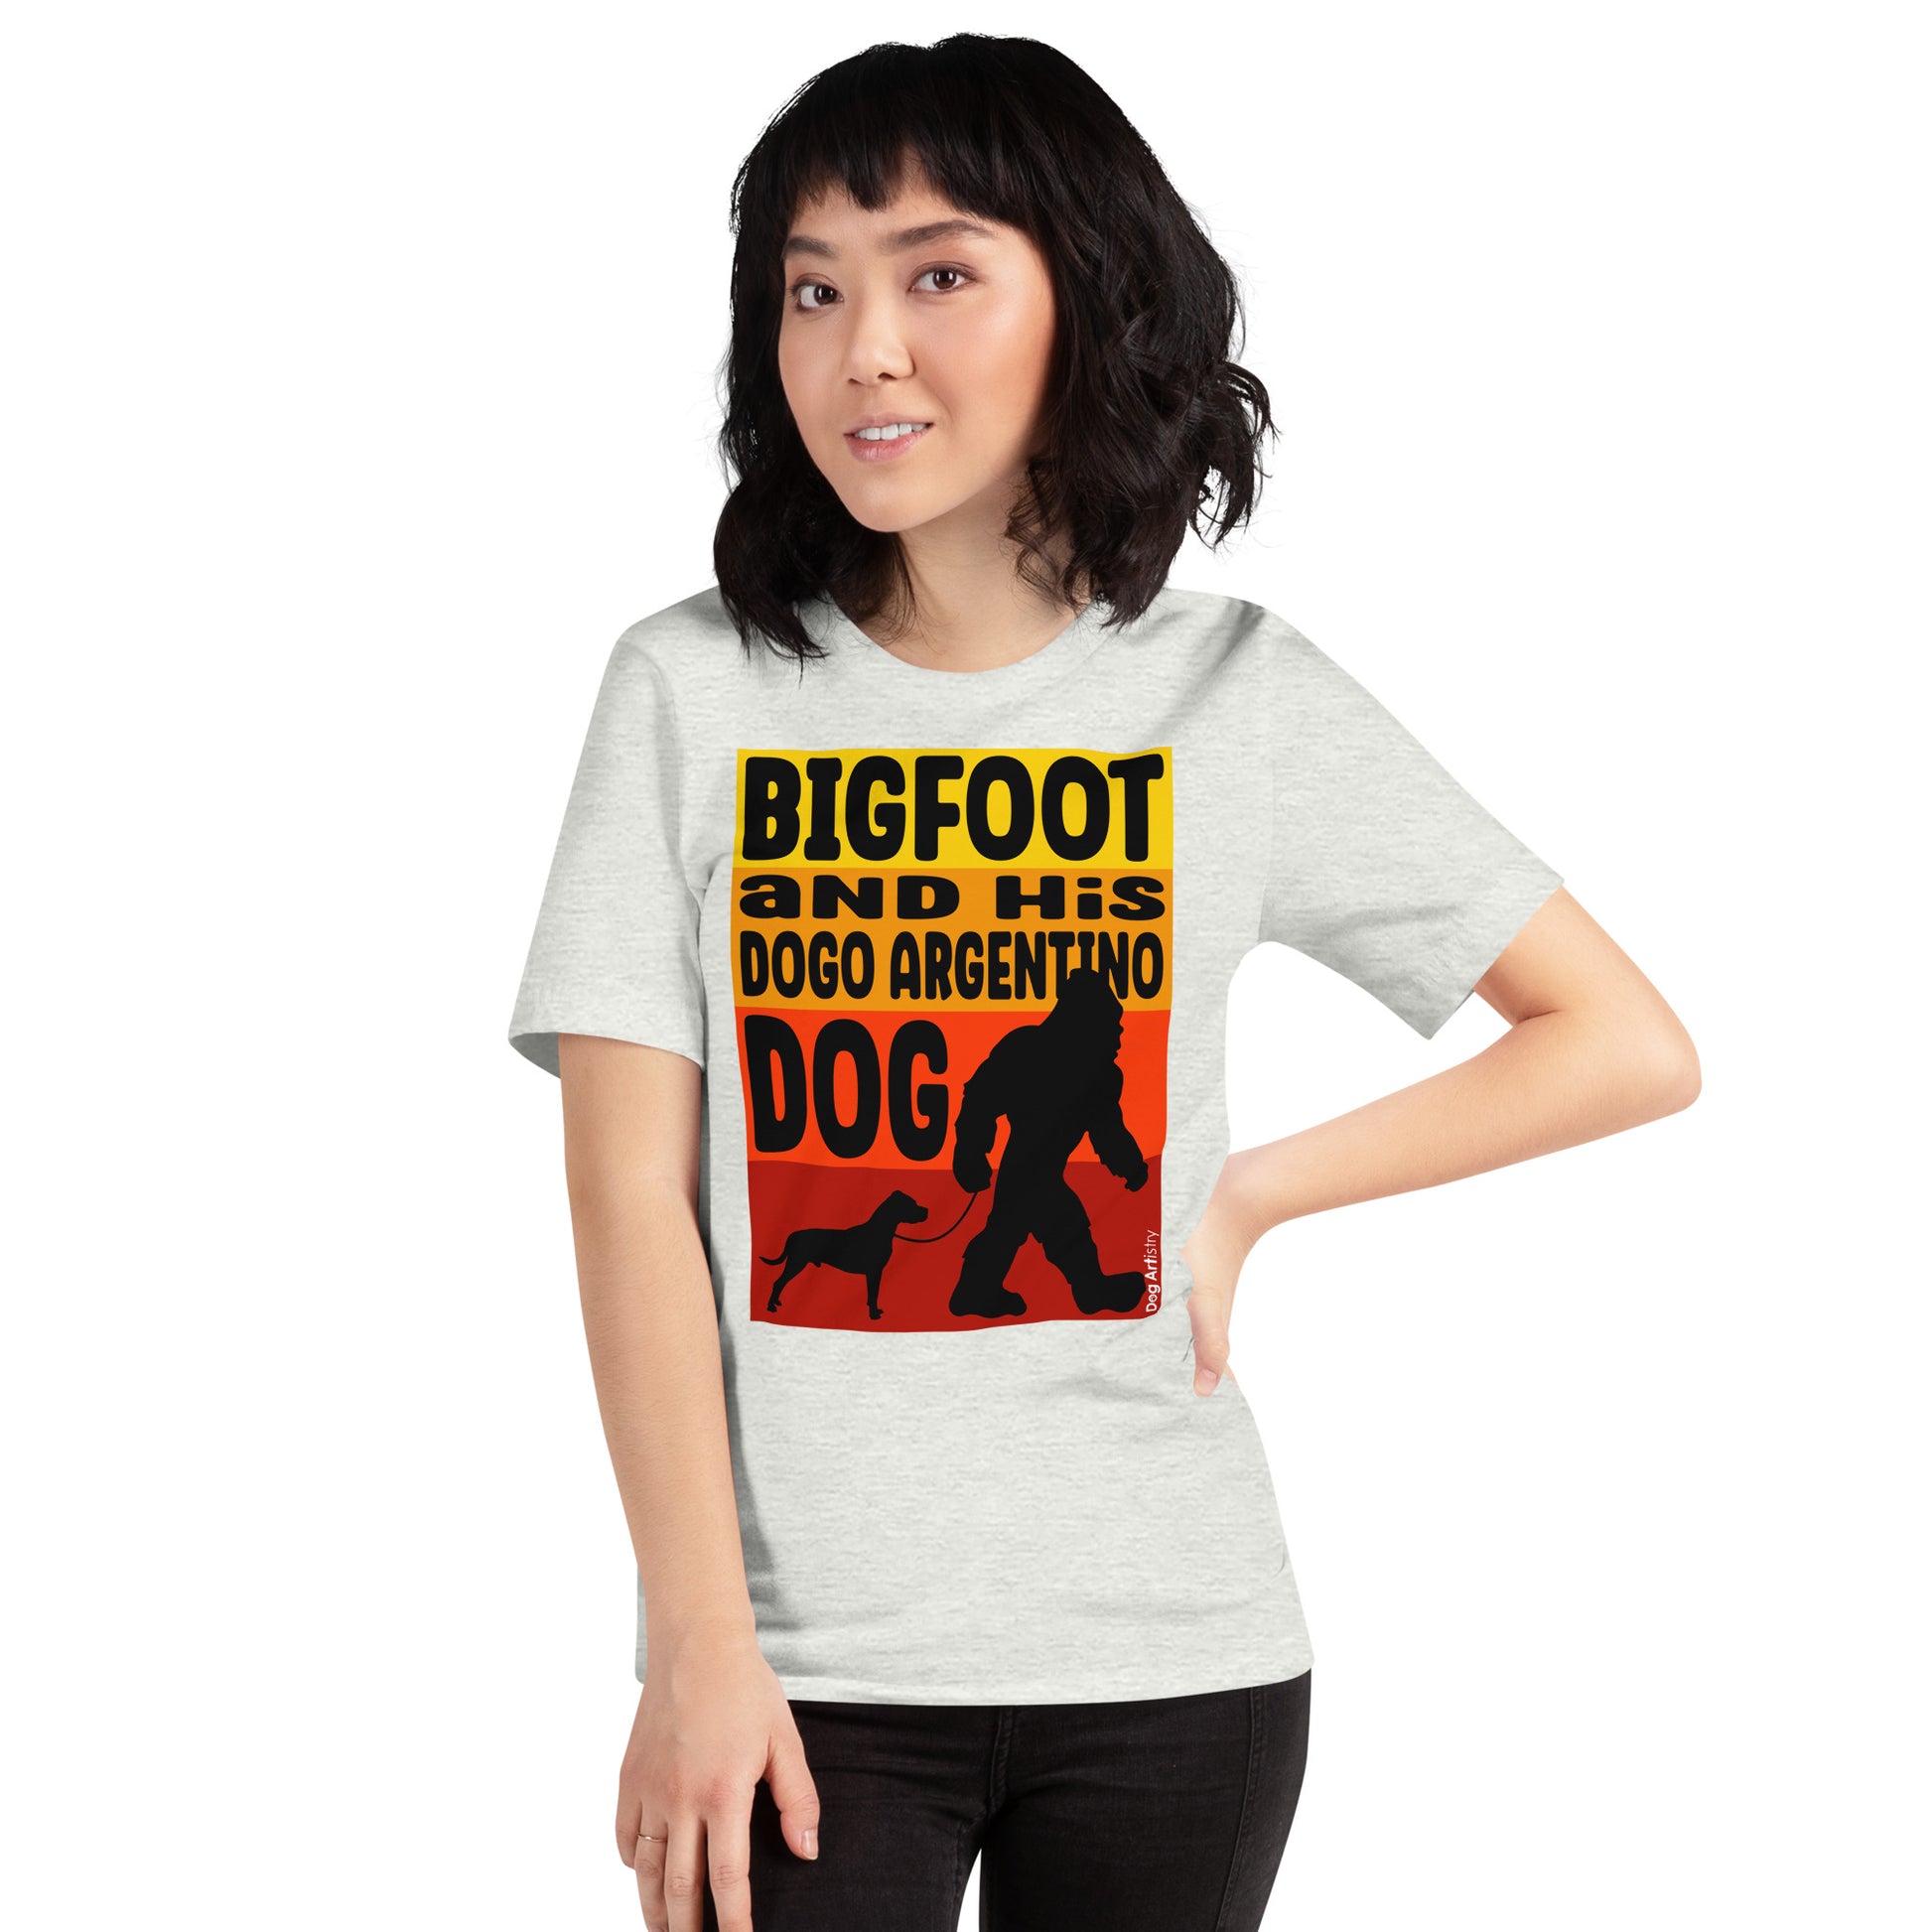 Bigfoot and his Dogo Argentino dog unisex ash t-shirt by Dog Artistry.